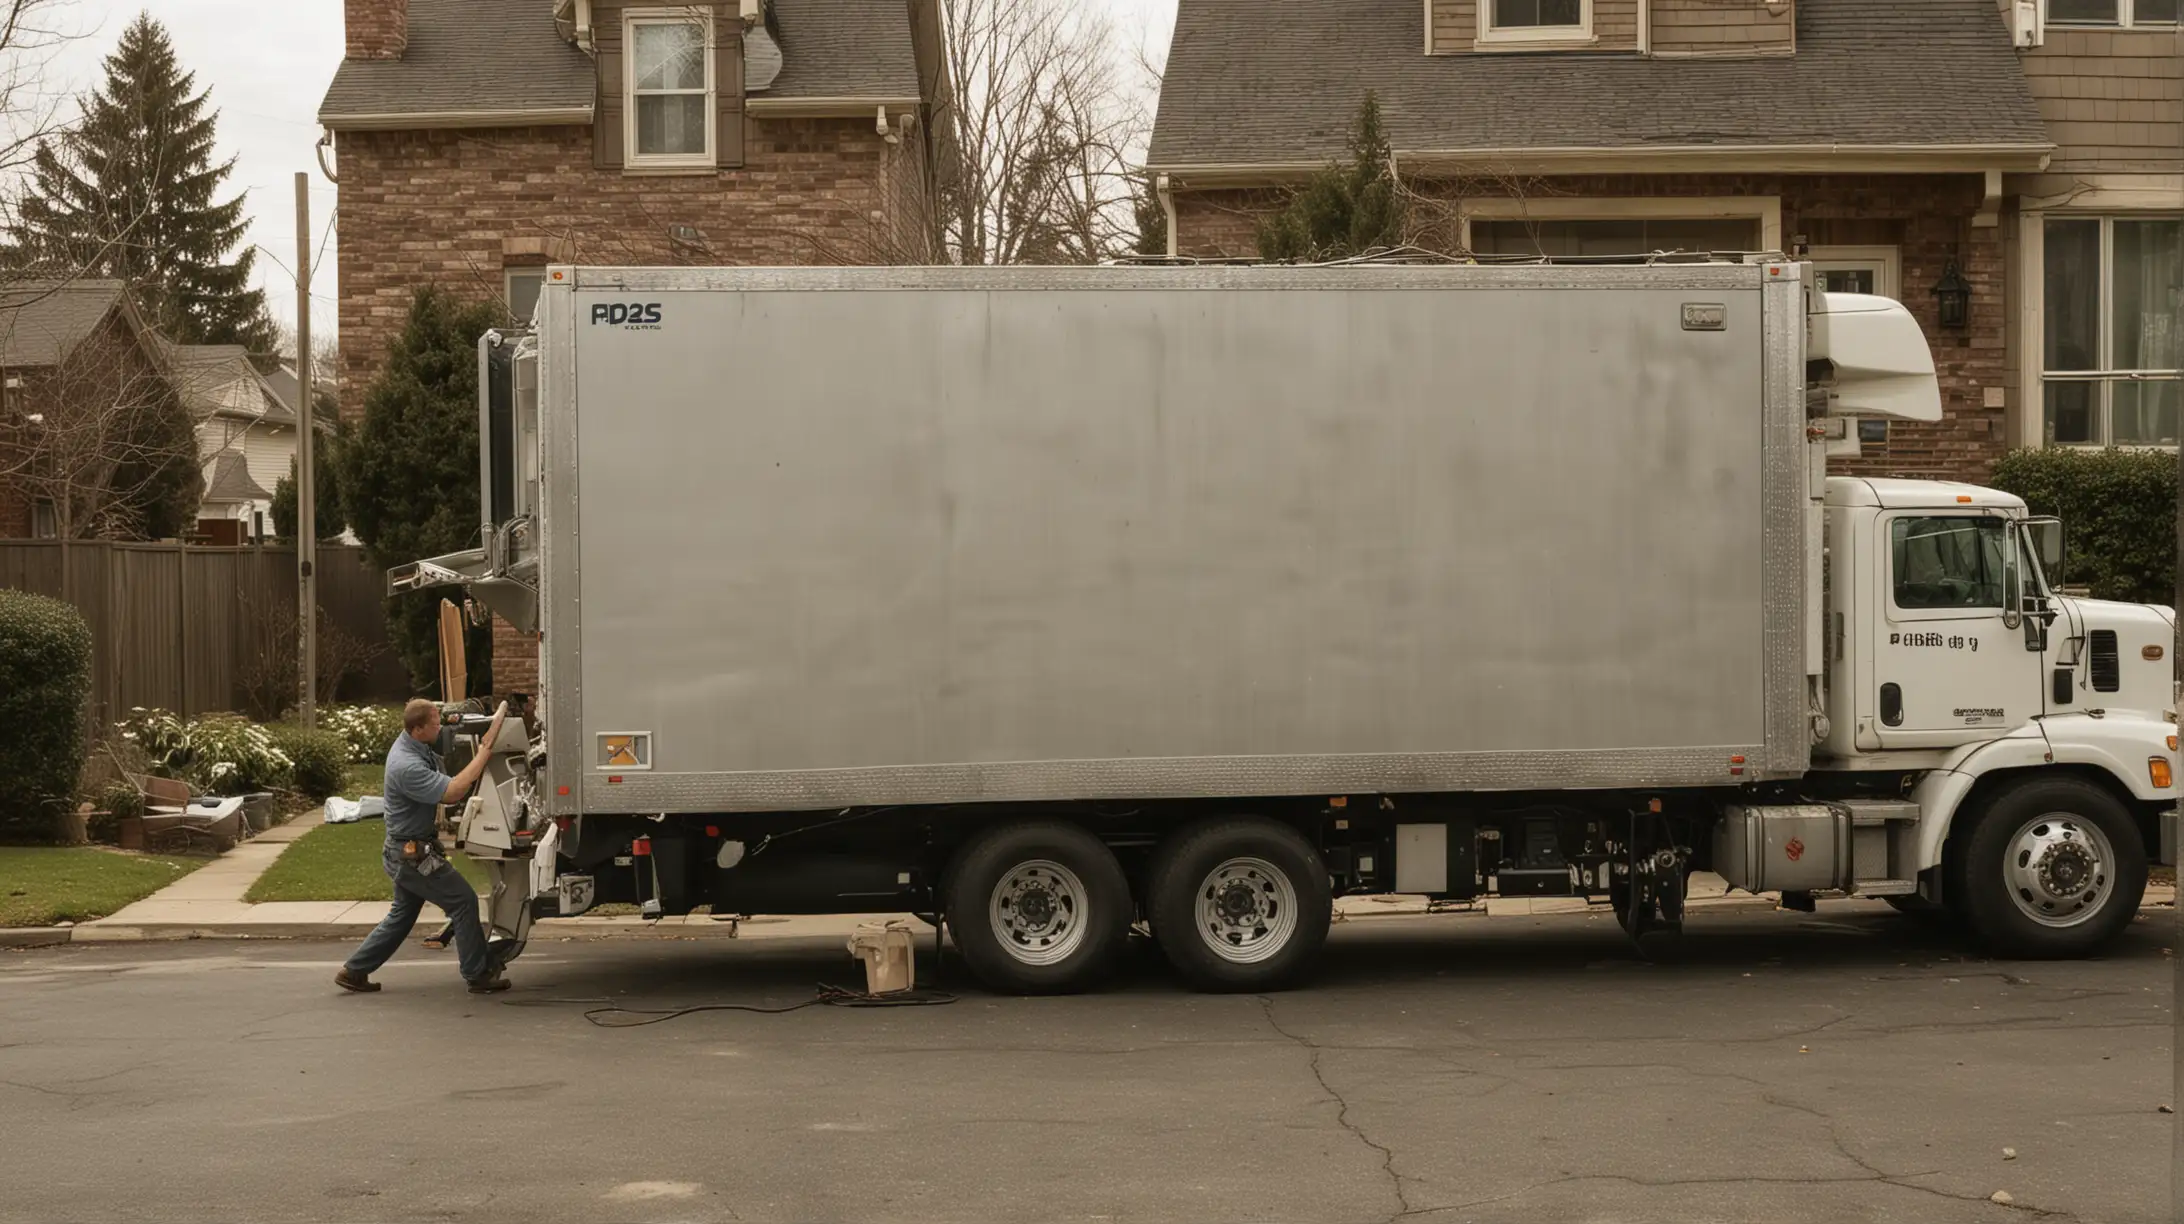 Photograph a scene of a worn-out refrigerator being loaded onto a removal truck. The setting is outside a suburban home with the truck parked in the driveway. Highlight the scale of the appliance in relation to the workers, emphasizing the effort and care taken in its removal. The refrigerator should appear clearly used and dated, symbolizing the need for disposal. Shoot with a 50mm lens, using an aperture of f/5.6 to ensure sharpness in the foreground while softly blurring the home's background. The lighting should be bright and clear, representing a typical workday.